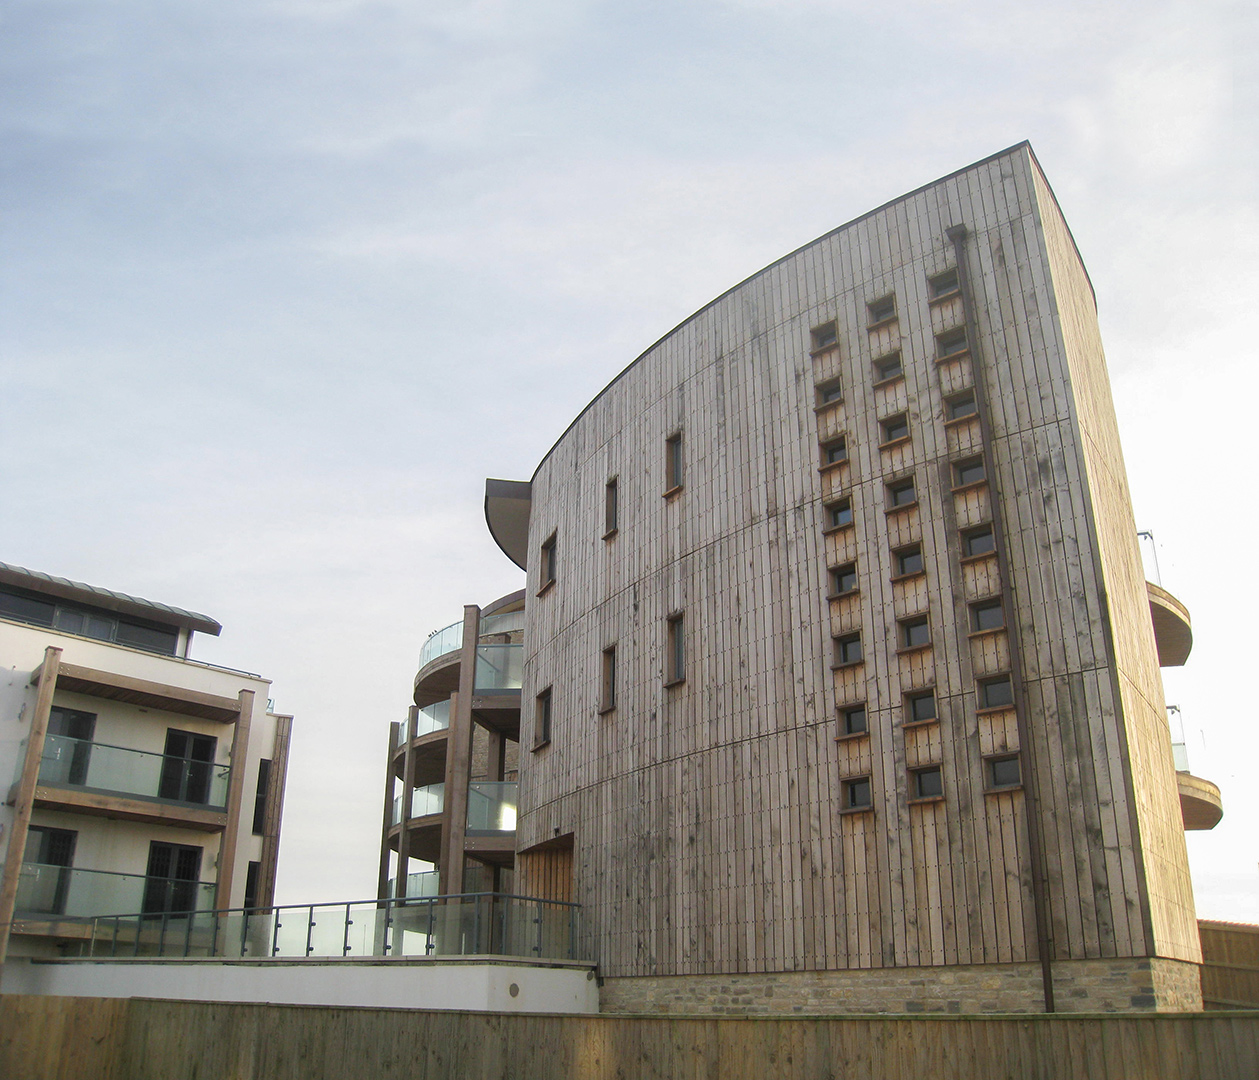 rear view of west bay apartments with wooden cladding on building